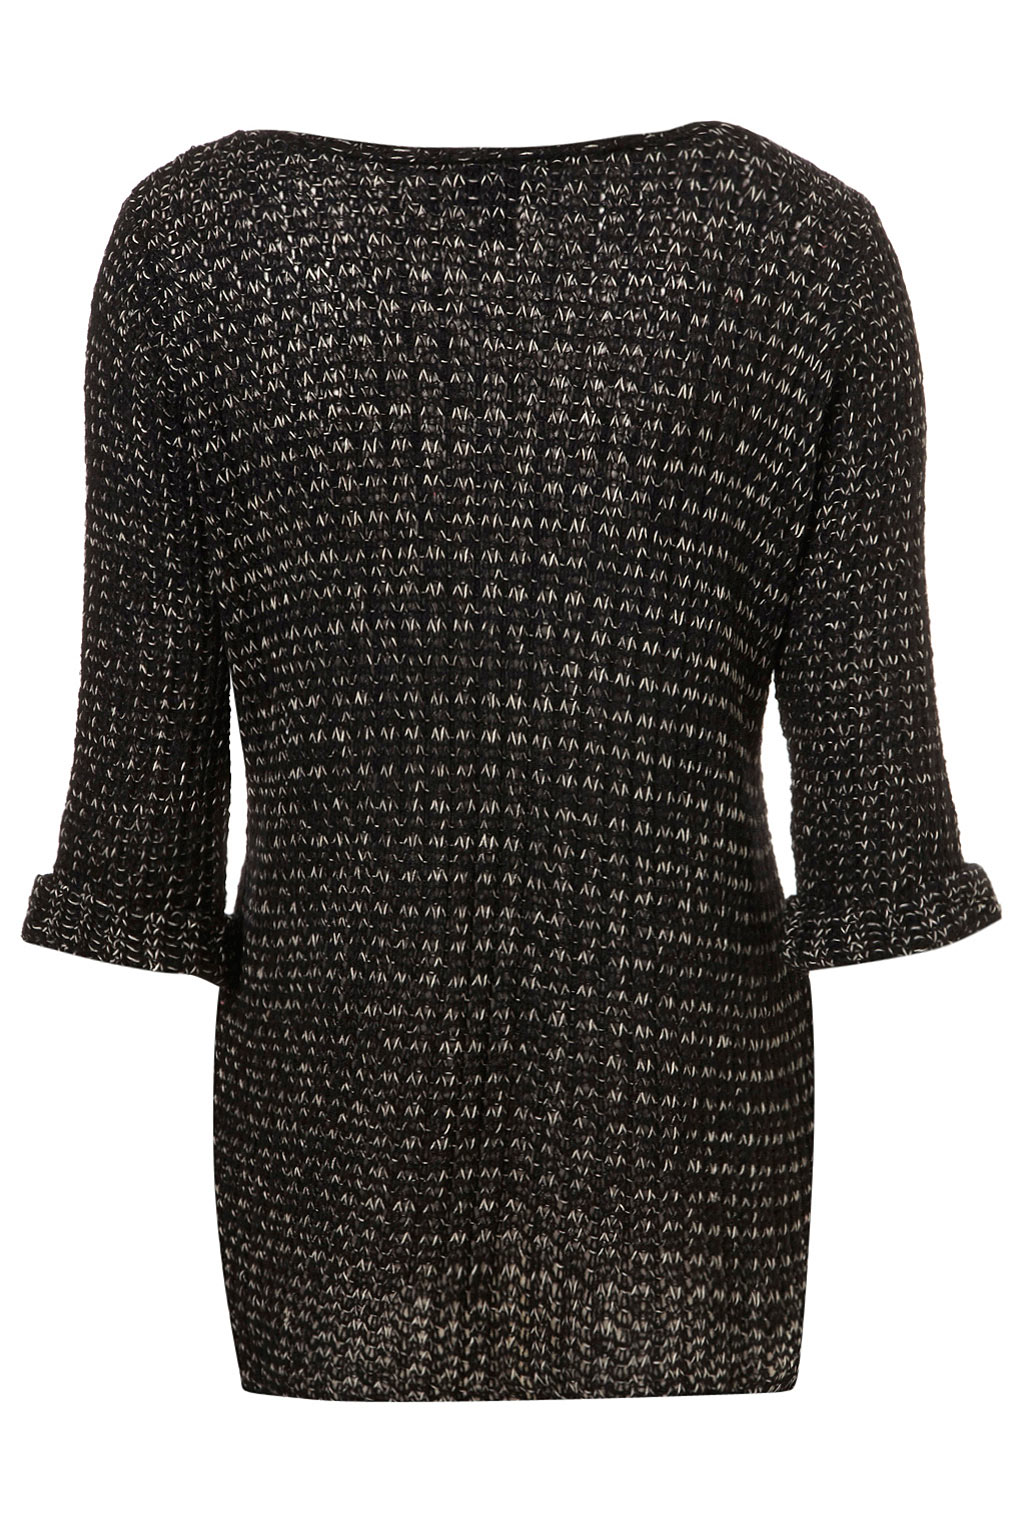 Lyst - Topshop Knitted Open Stitch Jumper in Black